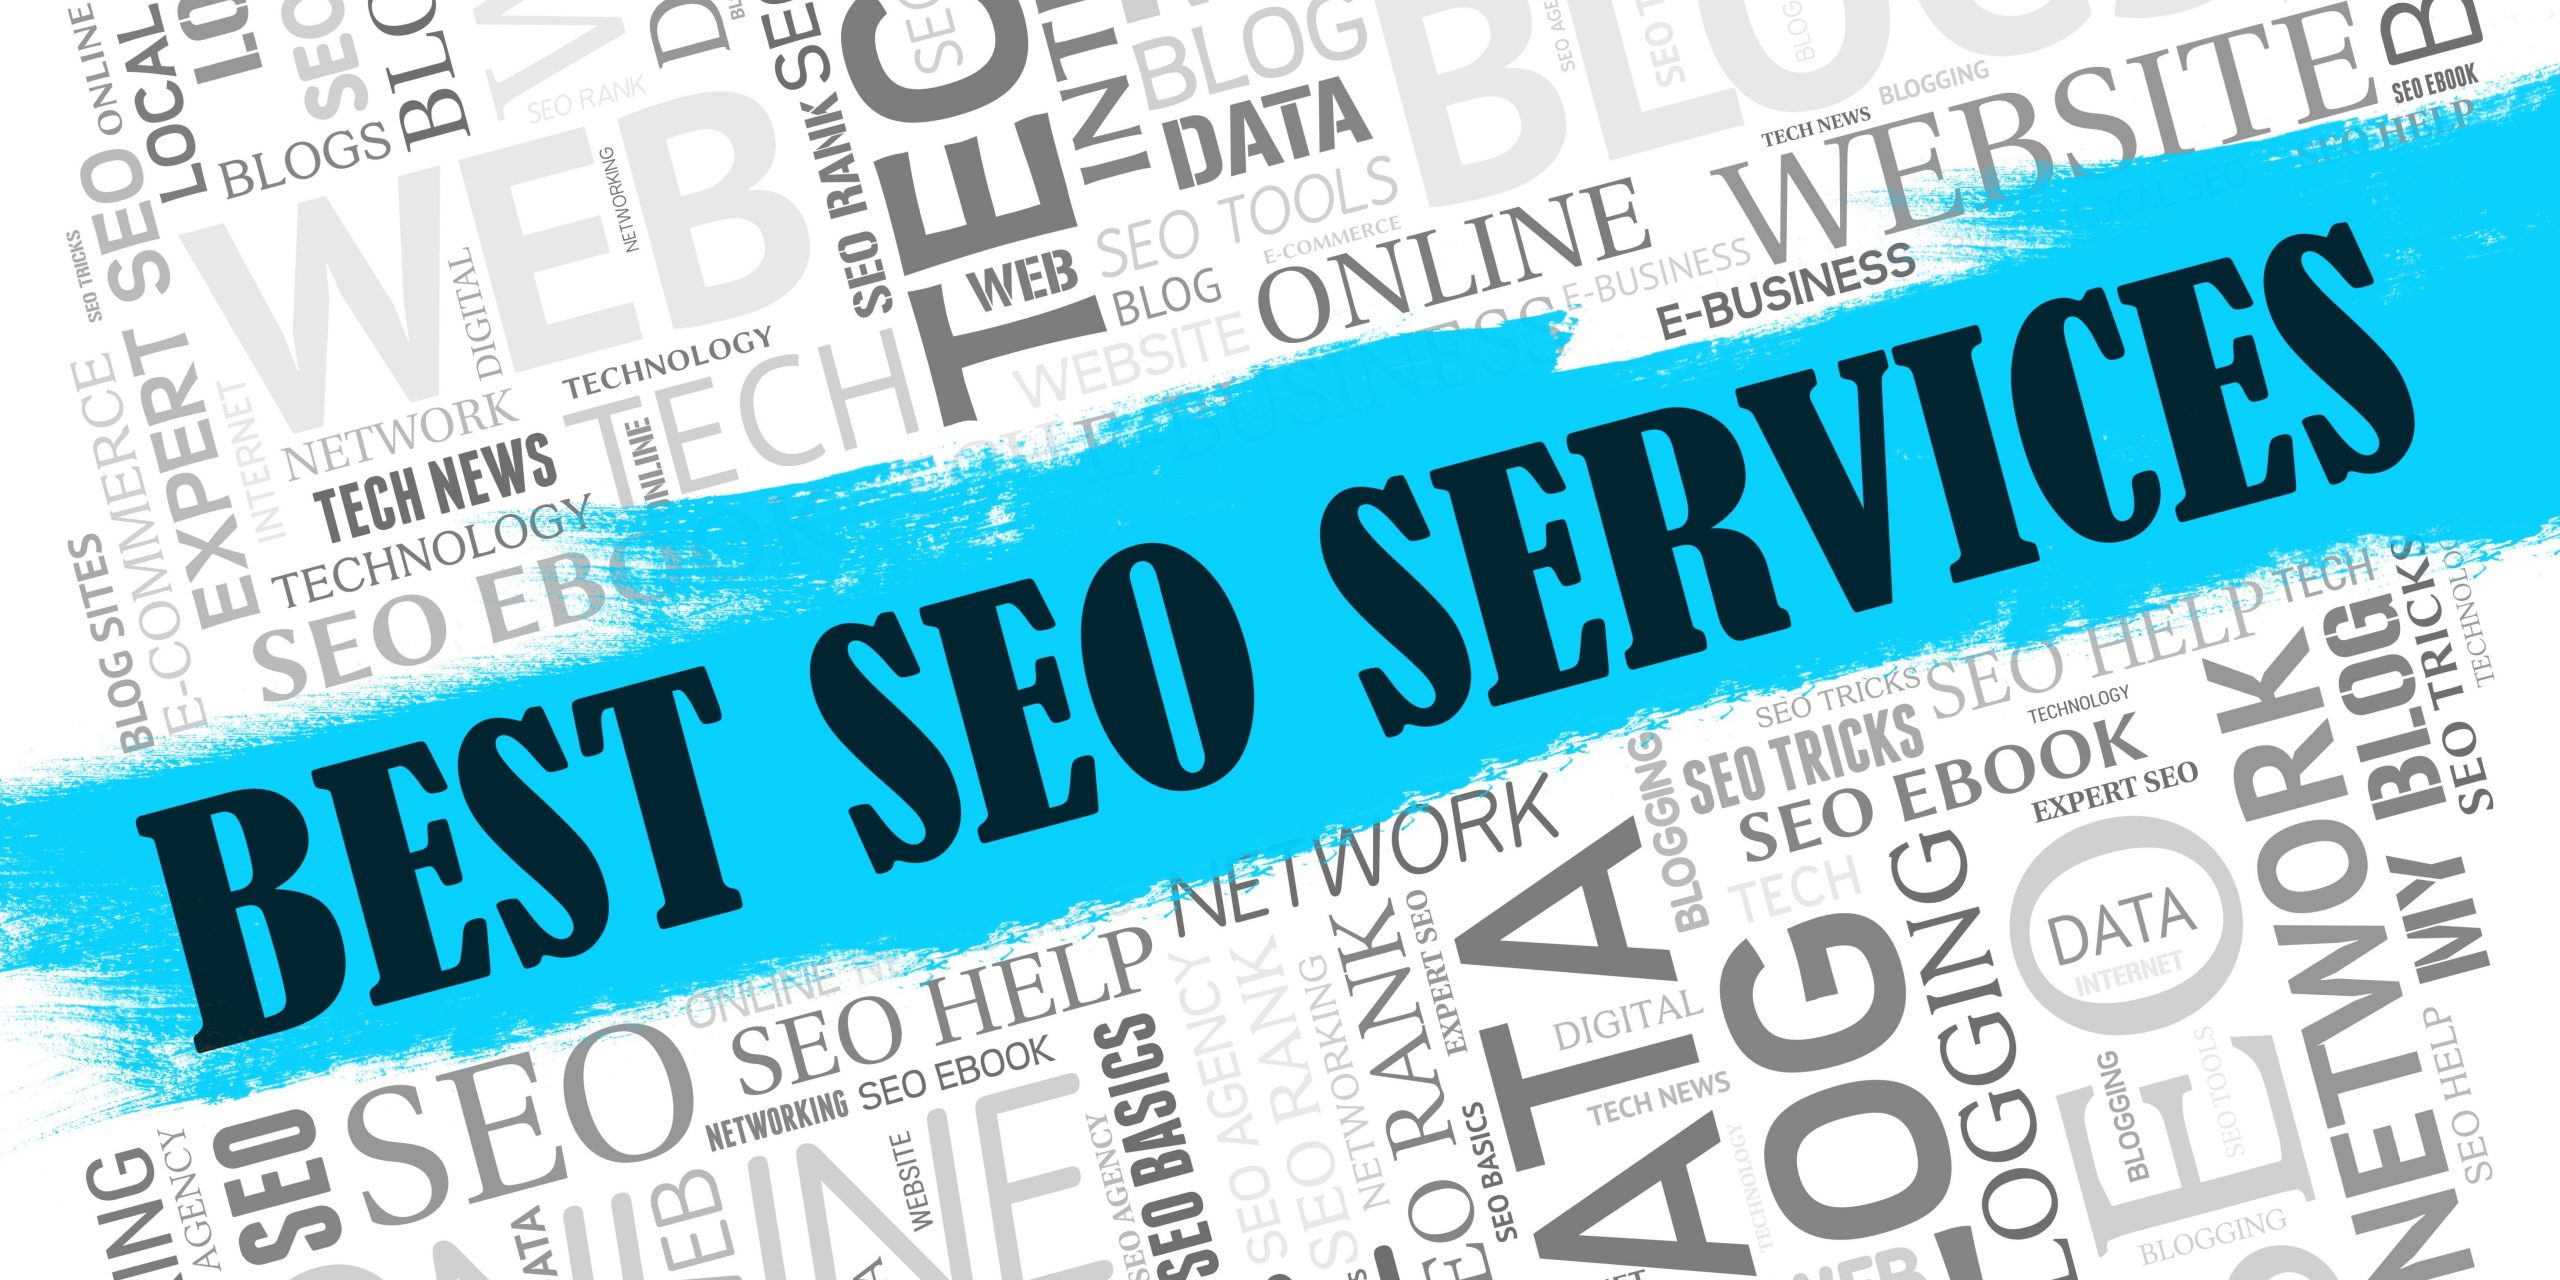 SEO Services Singapore: What You Need to Know